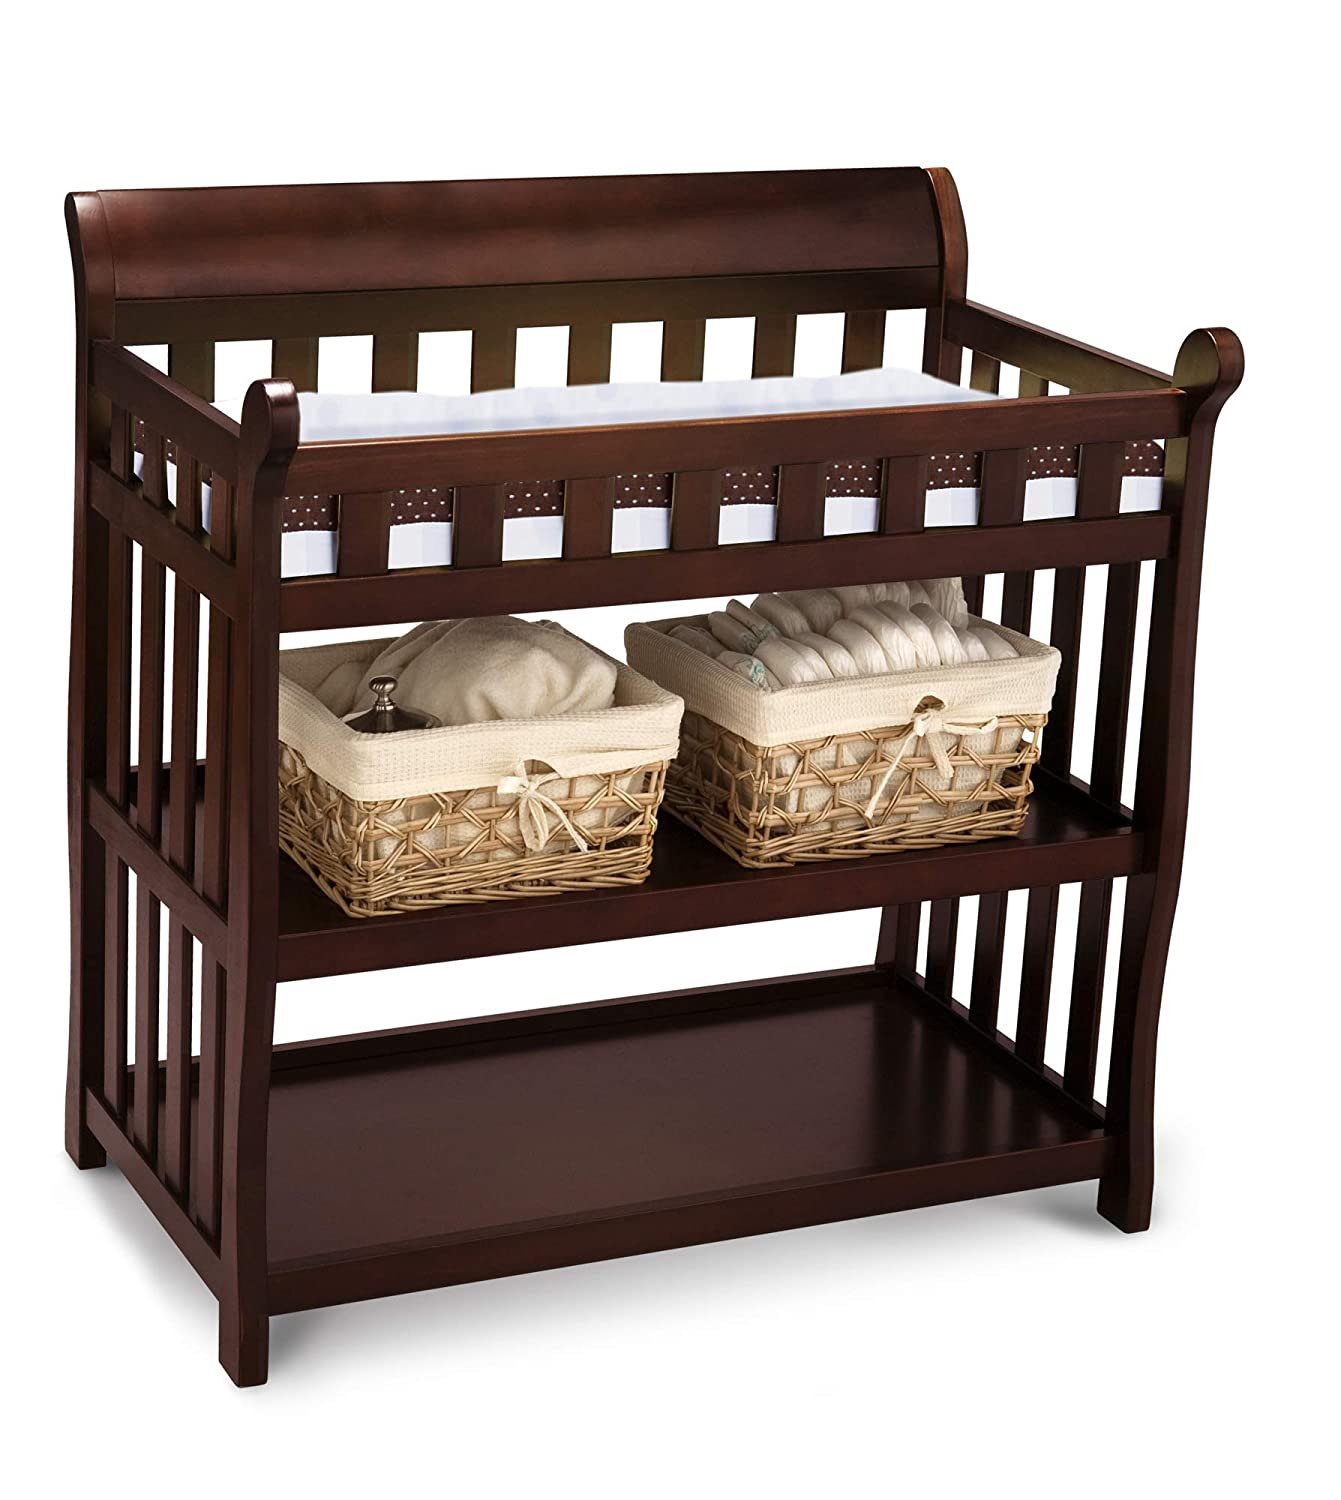 4. Delta Children Eclipse Changing Table with Changing Pad